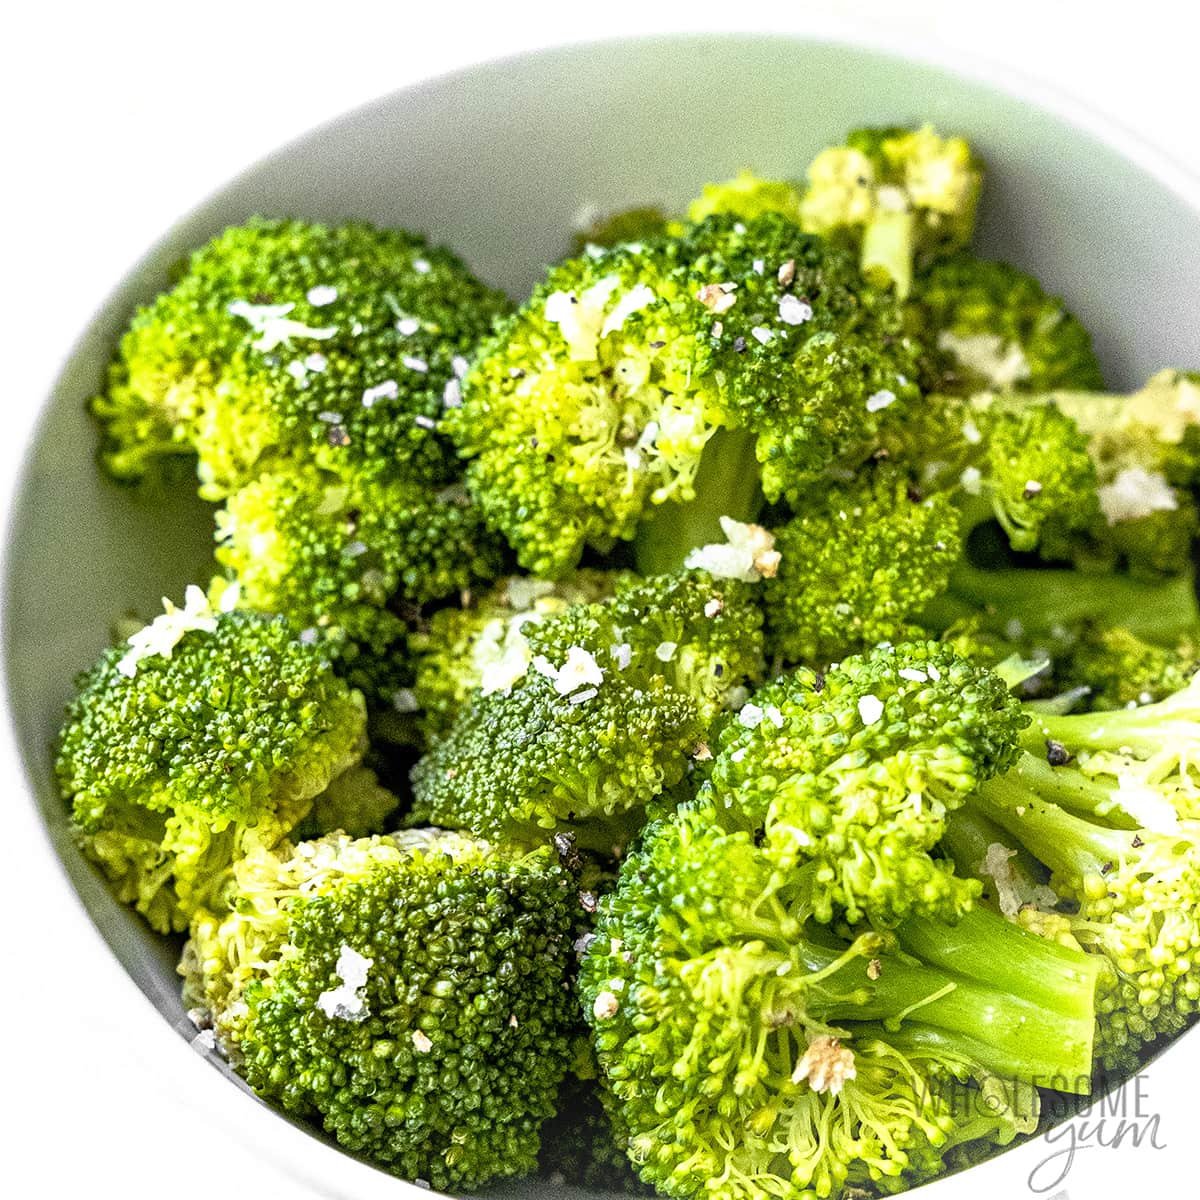 Finished Instant Pot broccoli with garlic.